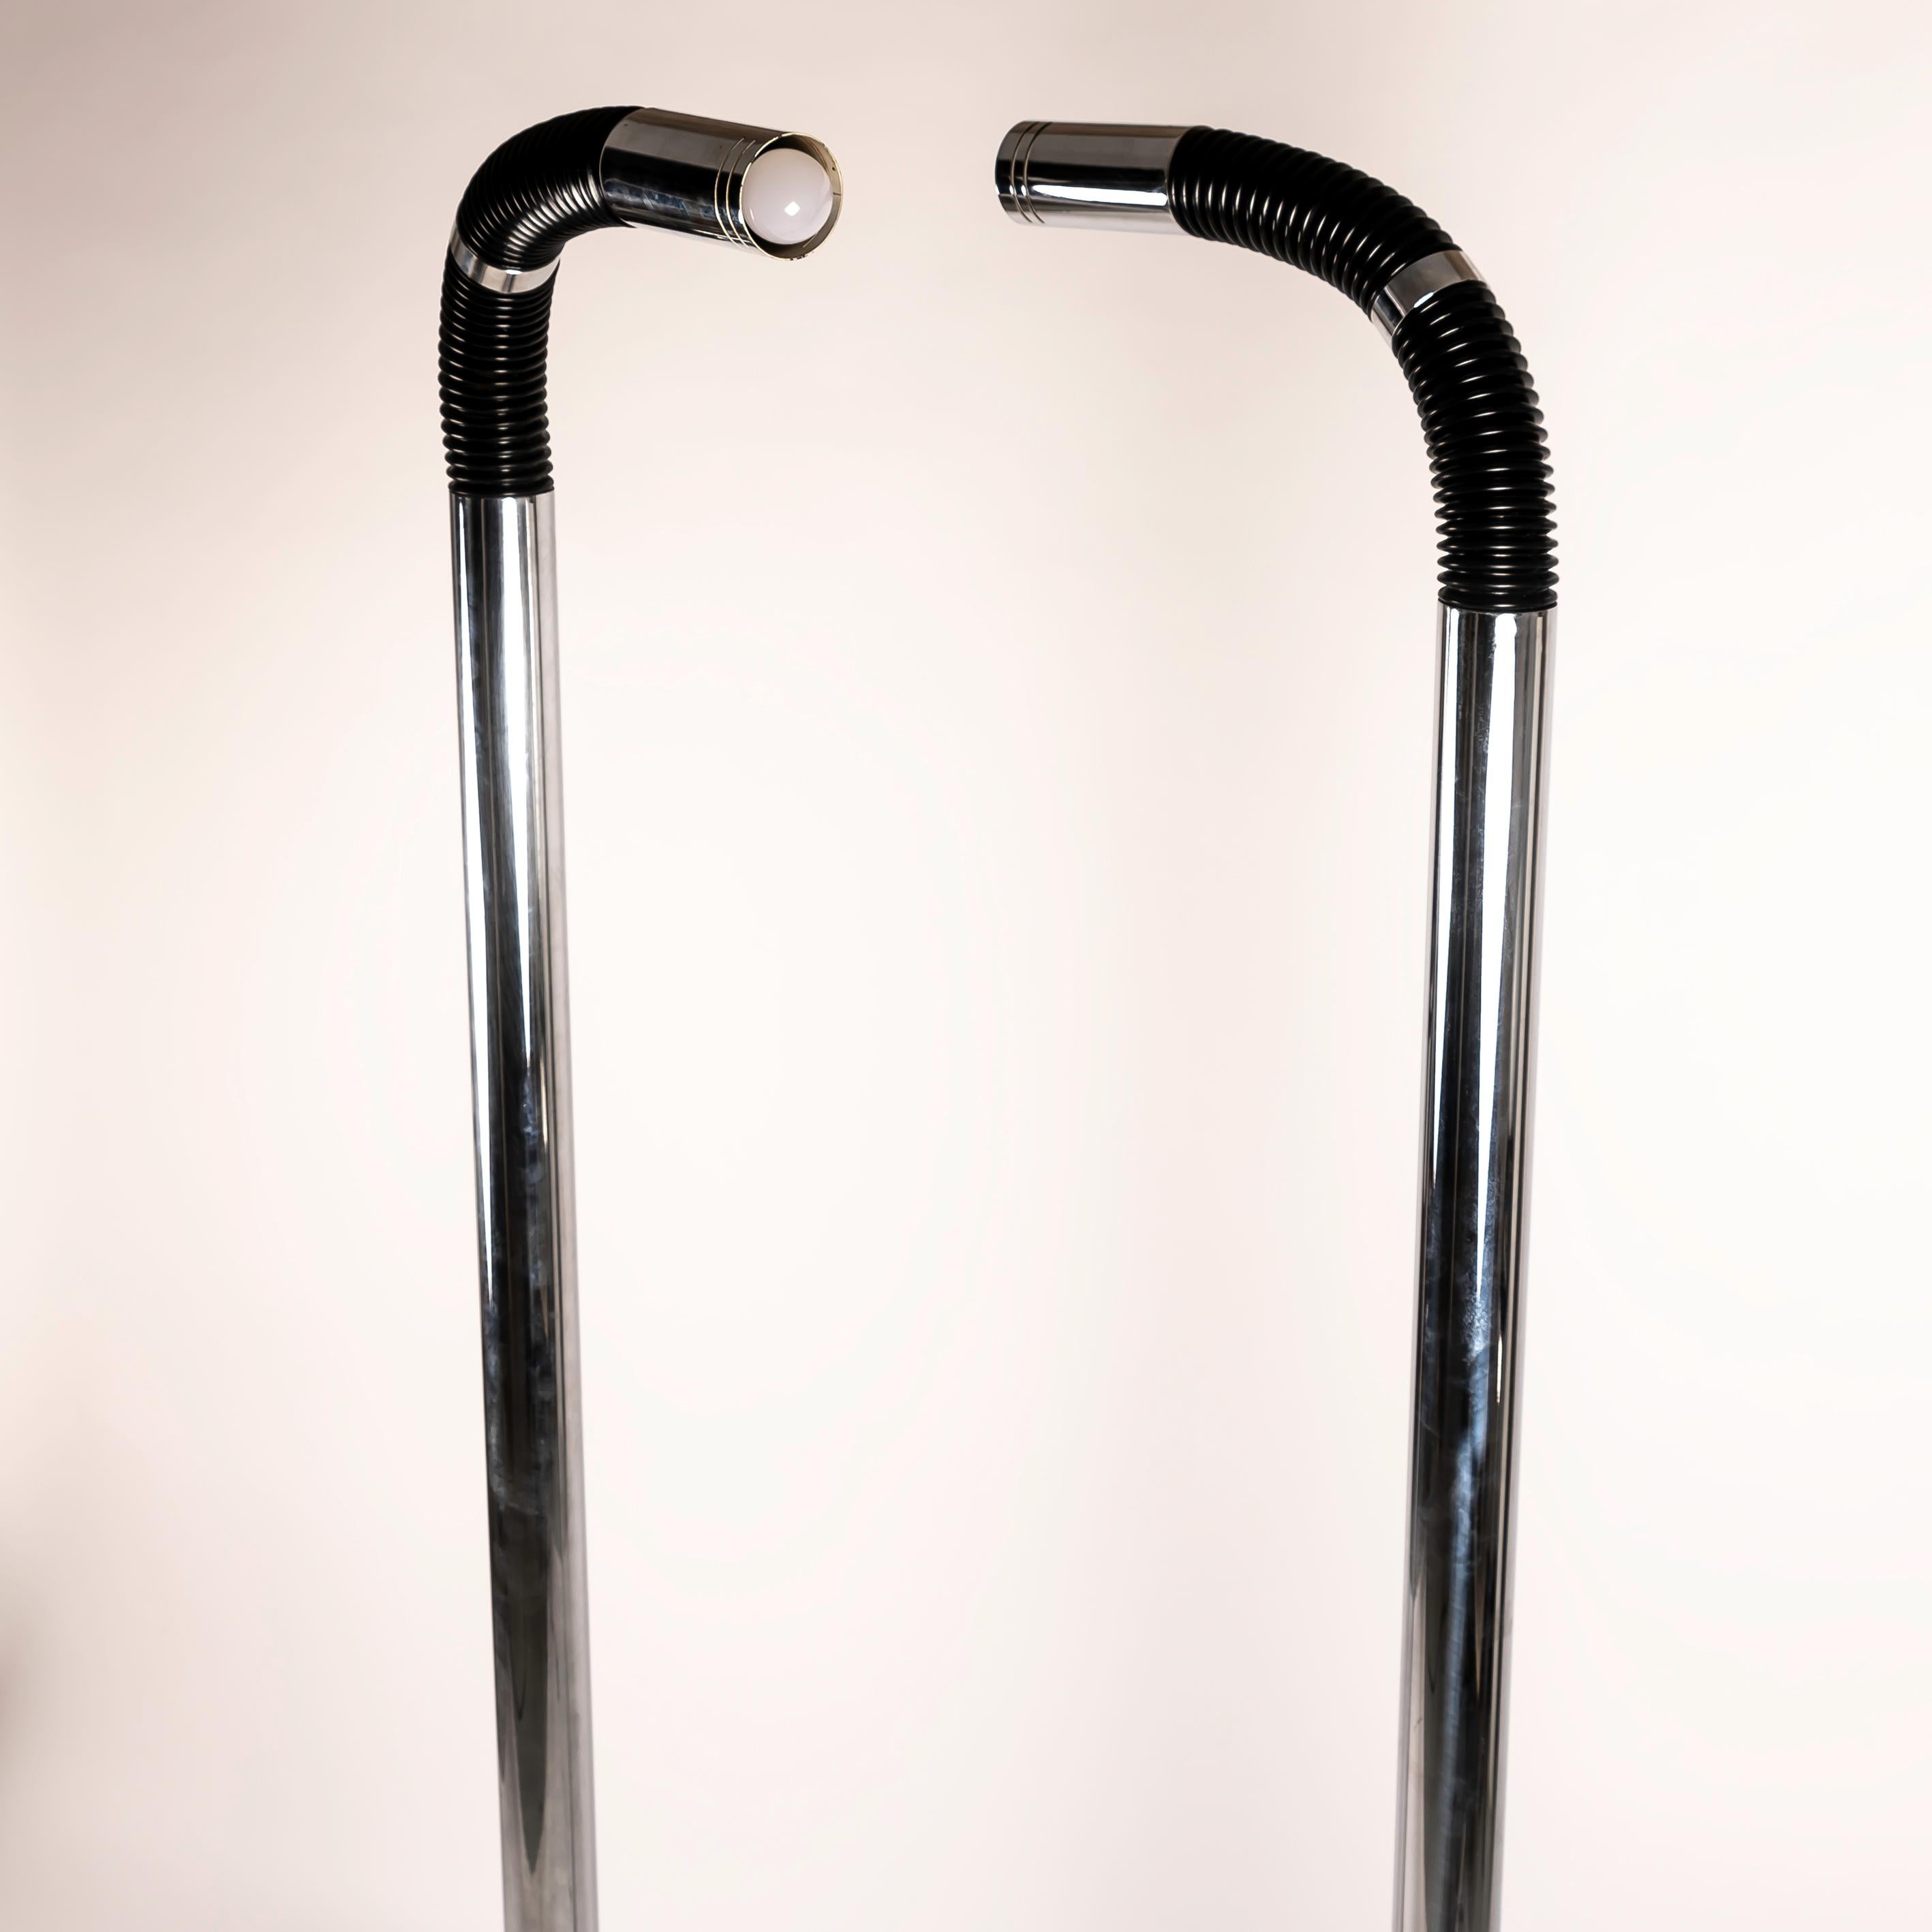 Late 20th Century Space Age Italian Floor Lamps in Lacquered Iron and Chromed Metal, 1970s For Sale